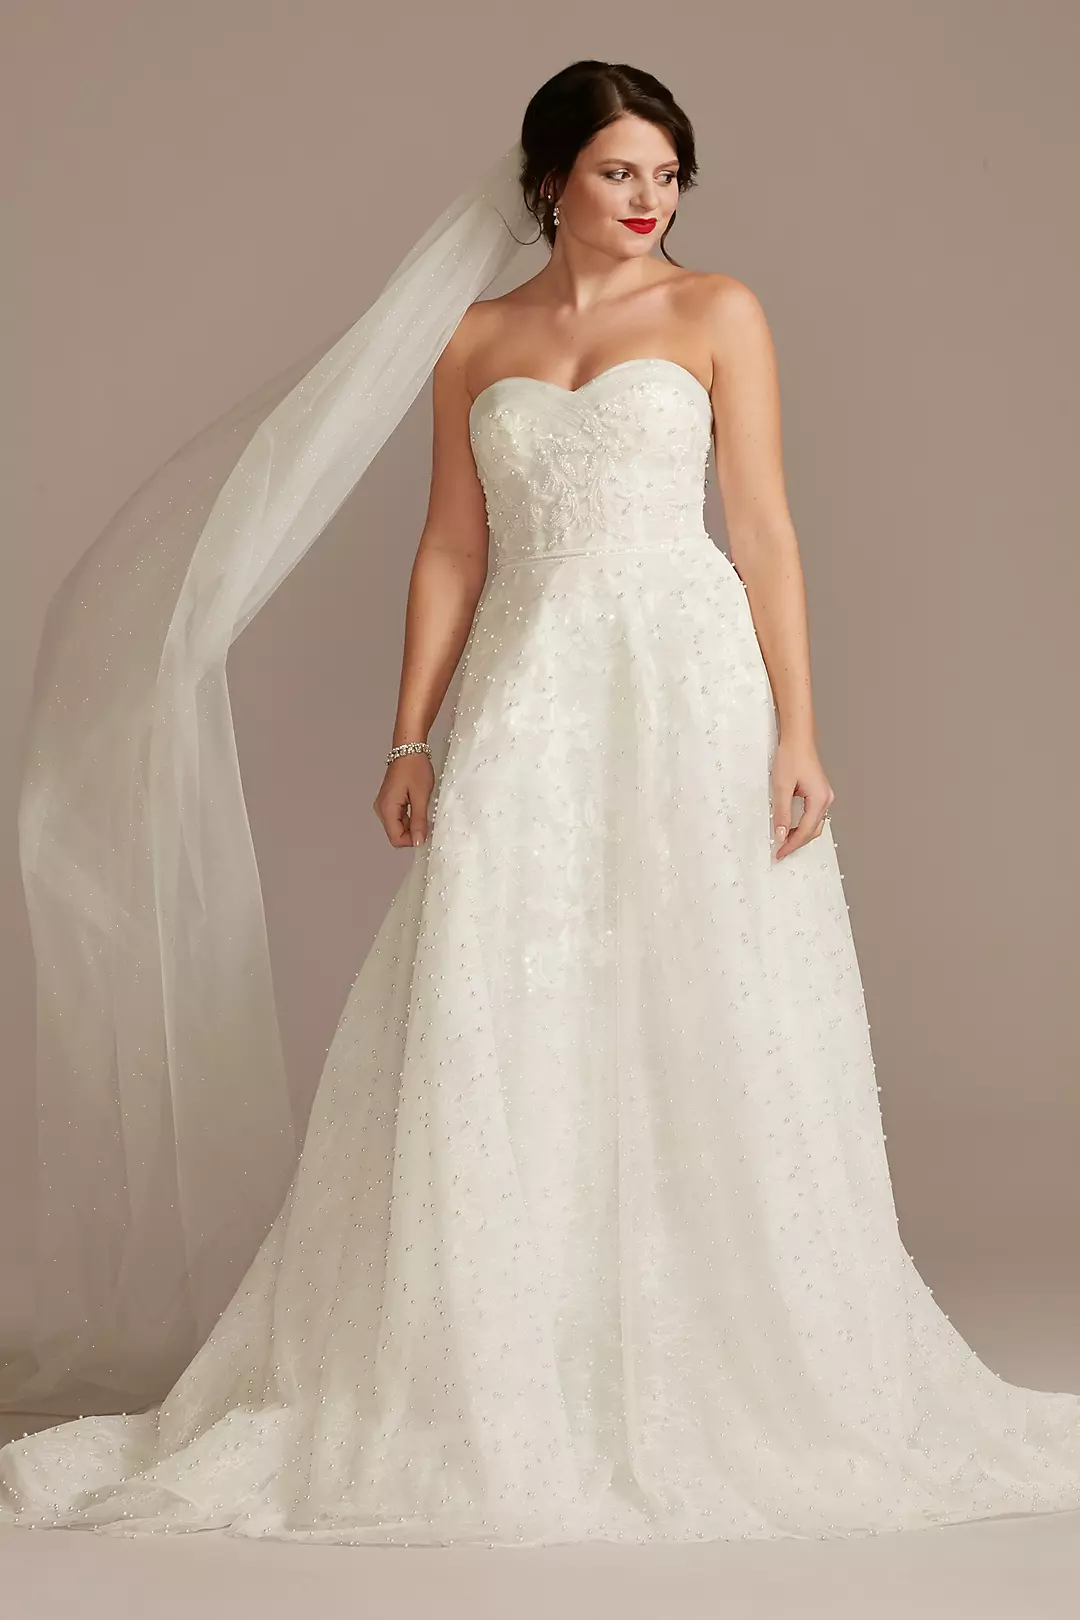 Strapless Pearl Applique Ball Gown Wedding Dress Image